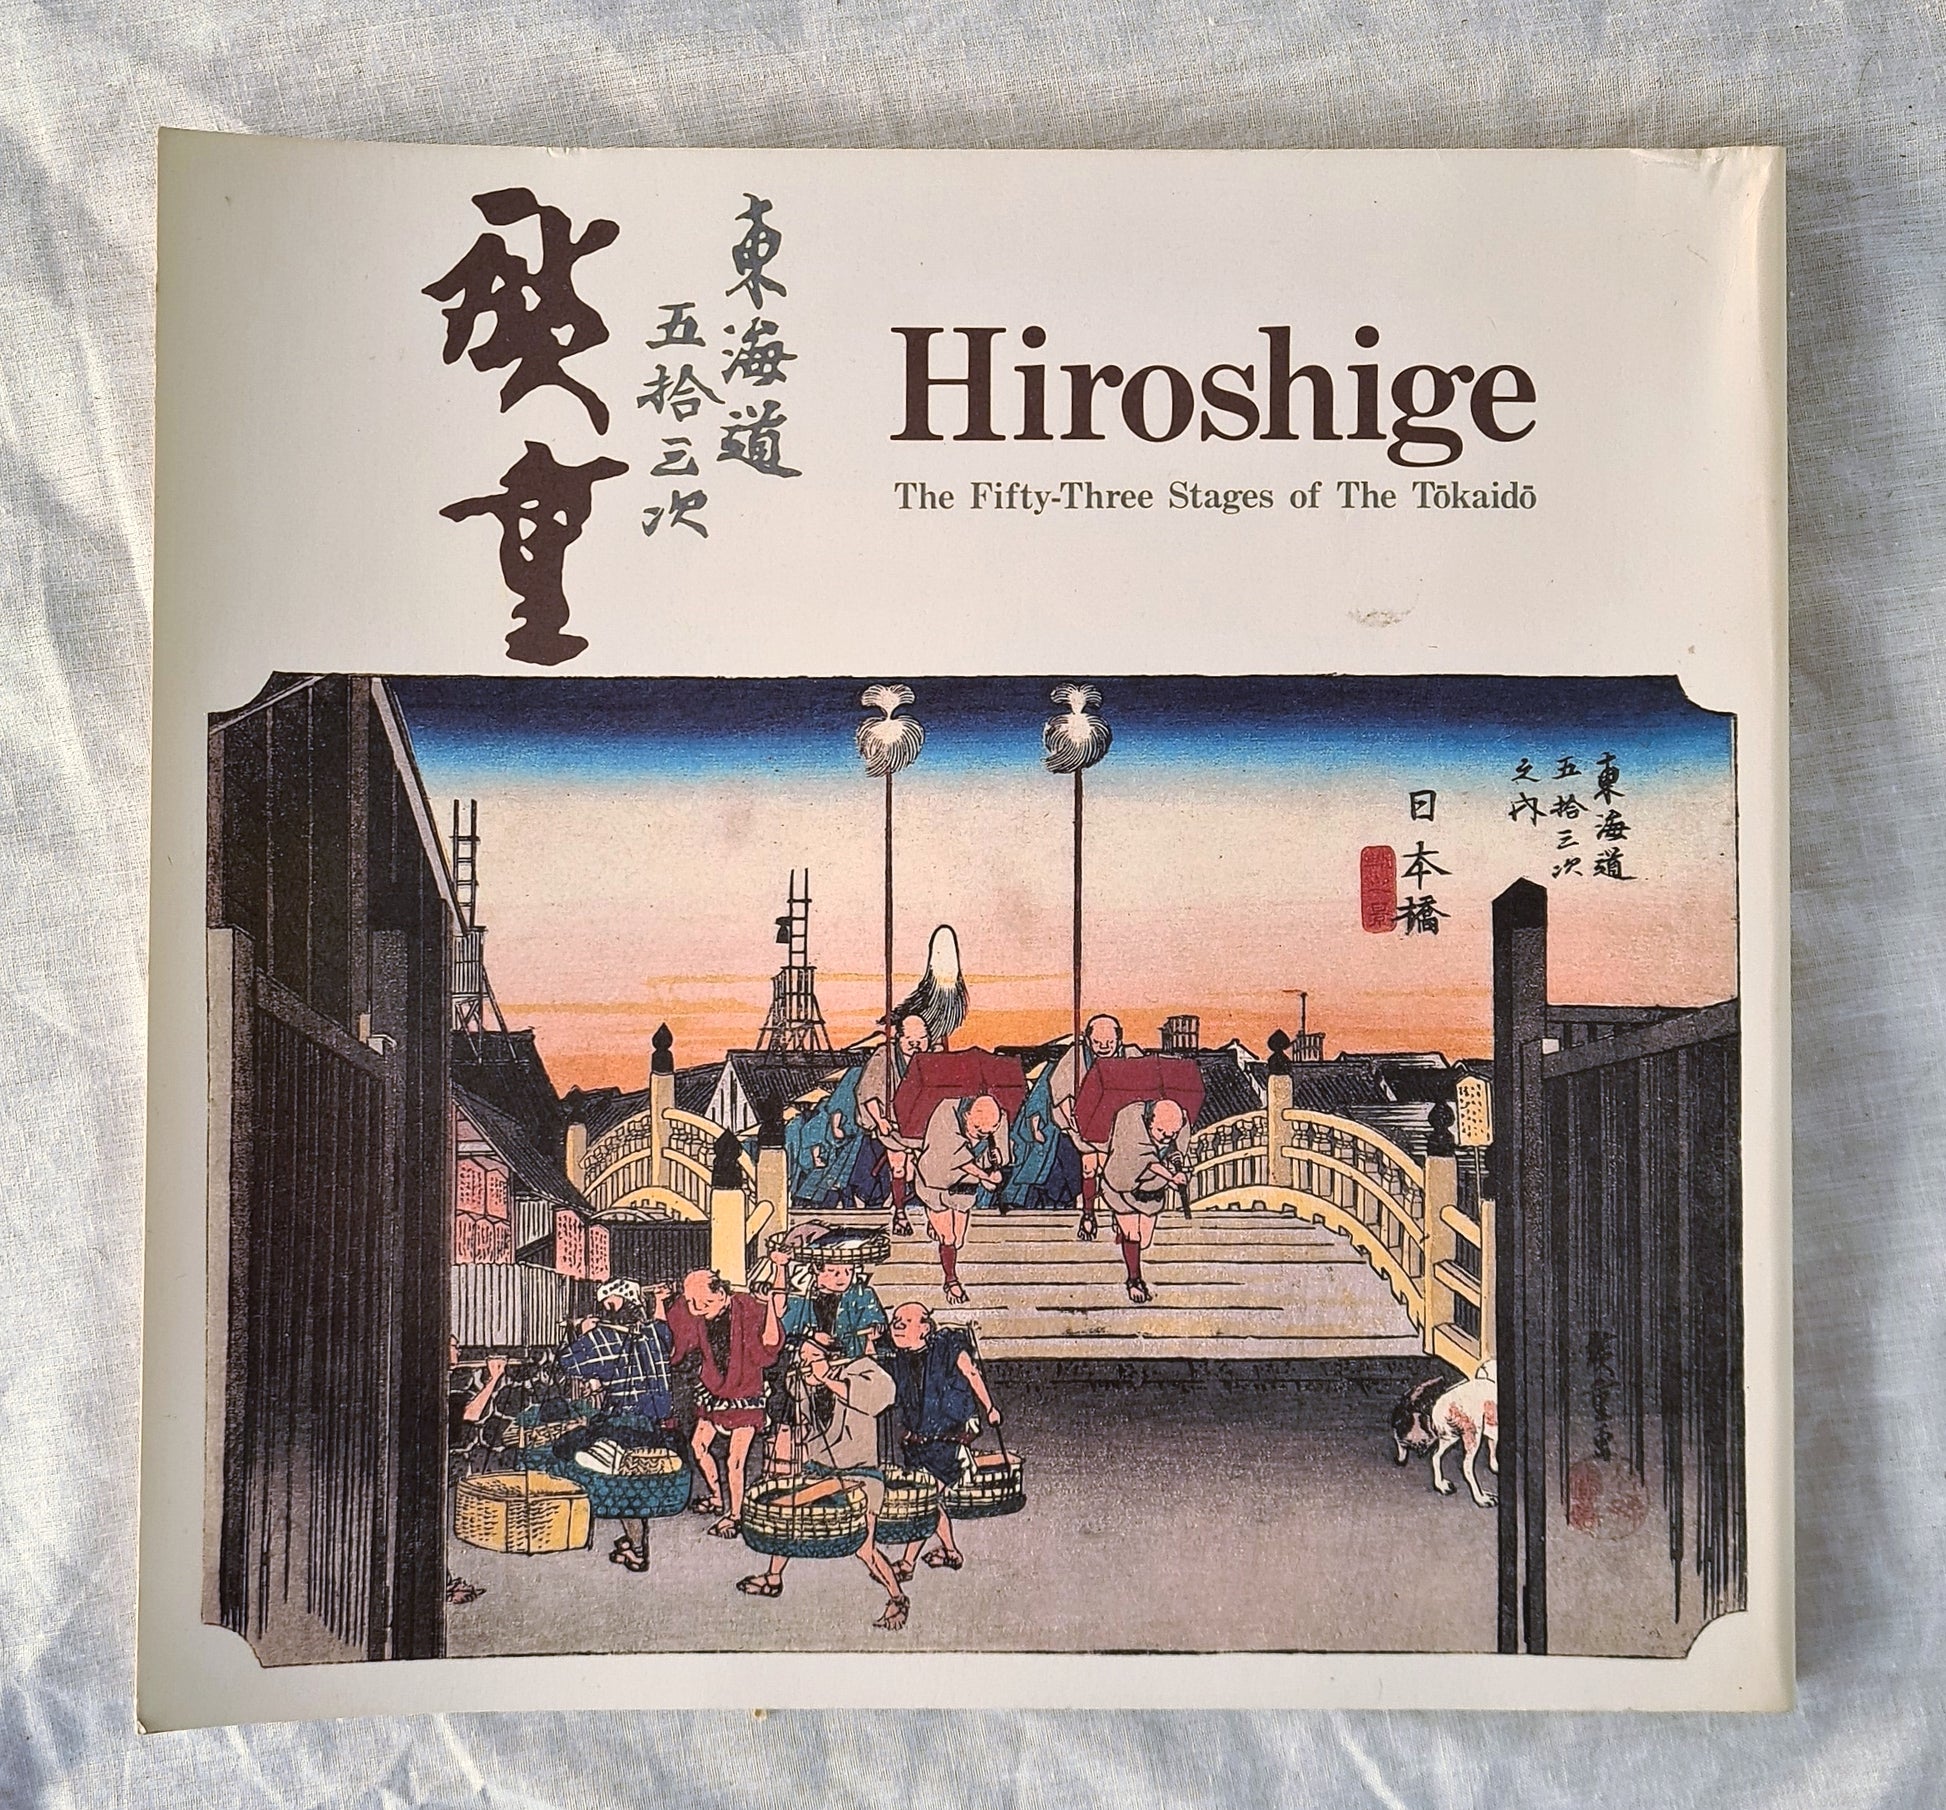 Hiroshige  The Fifty-Three Stages of The Tokaido  Hoeido Edition – Gyosho Edition – Reisho Edition  Woodblock Prints